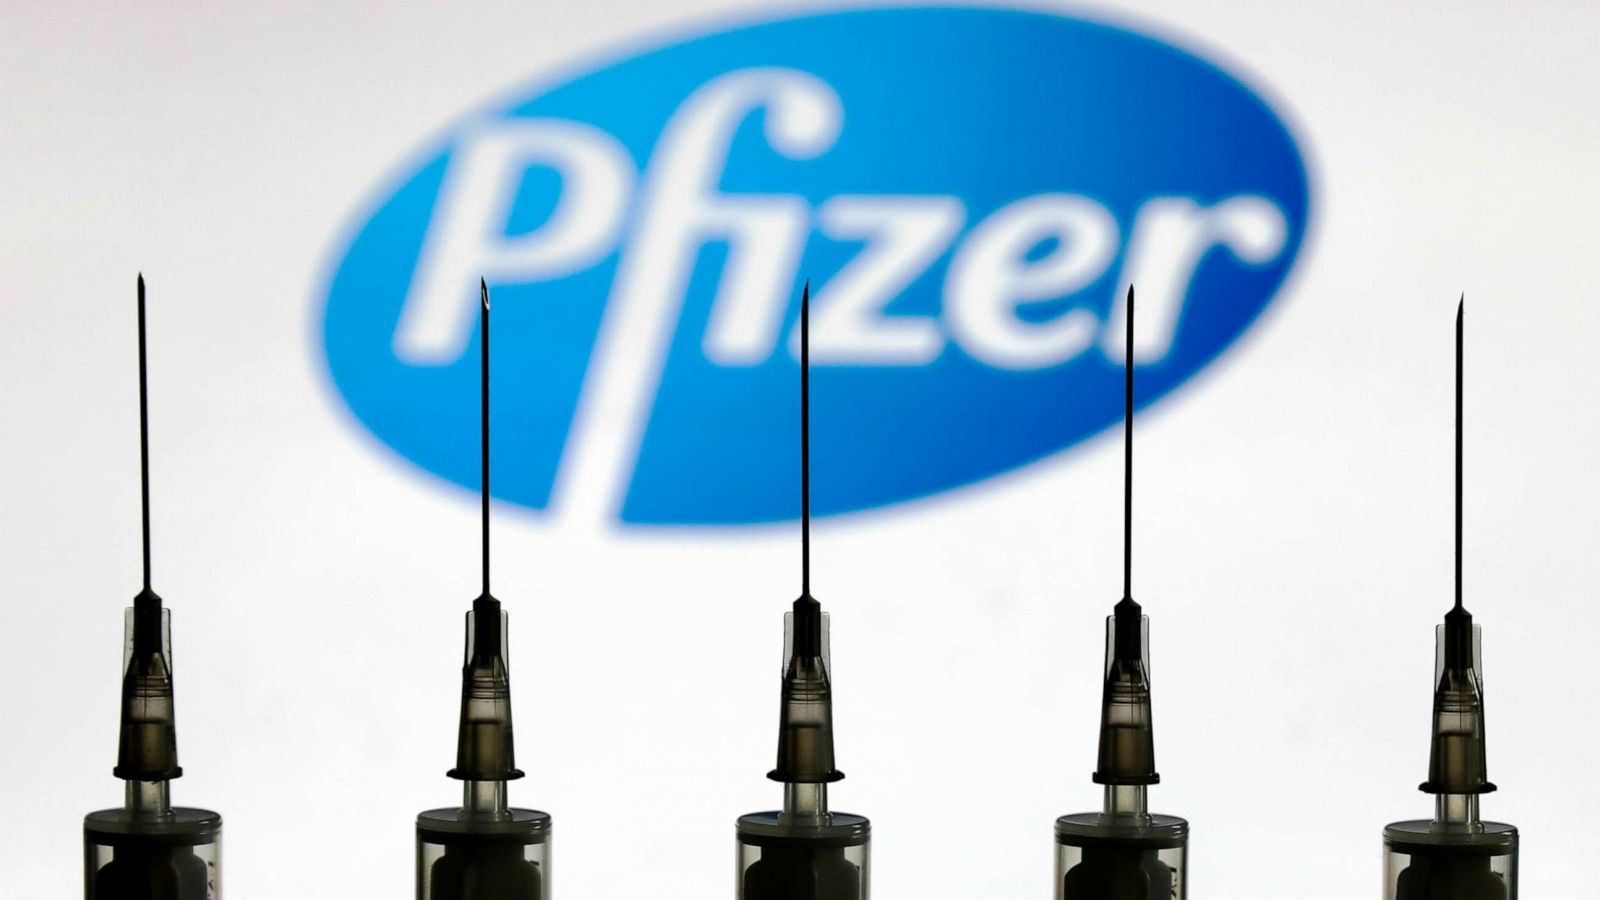 Highly anticipated COVID-19 vaccine data from Pfizer unlikely to come  before Election Day: CEO - ABC News